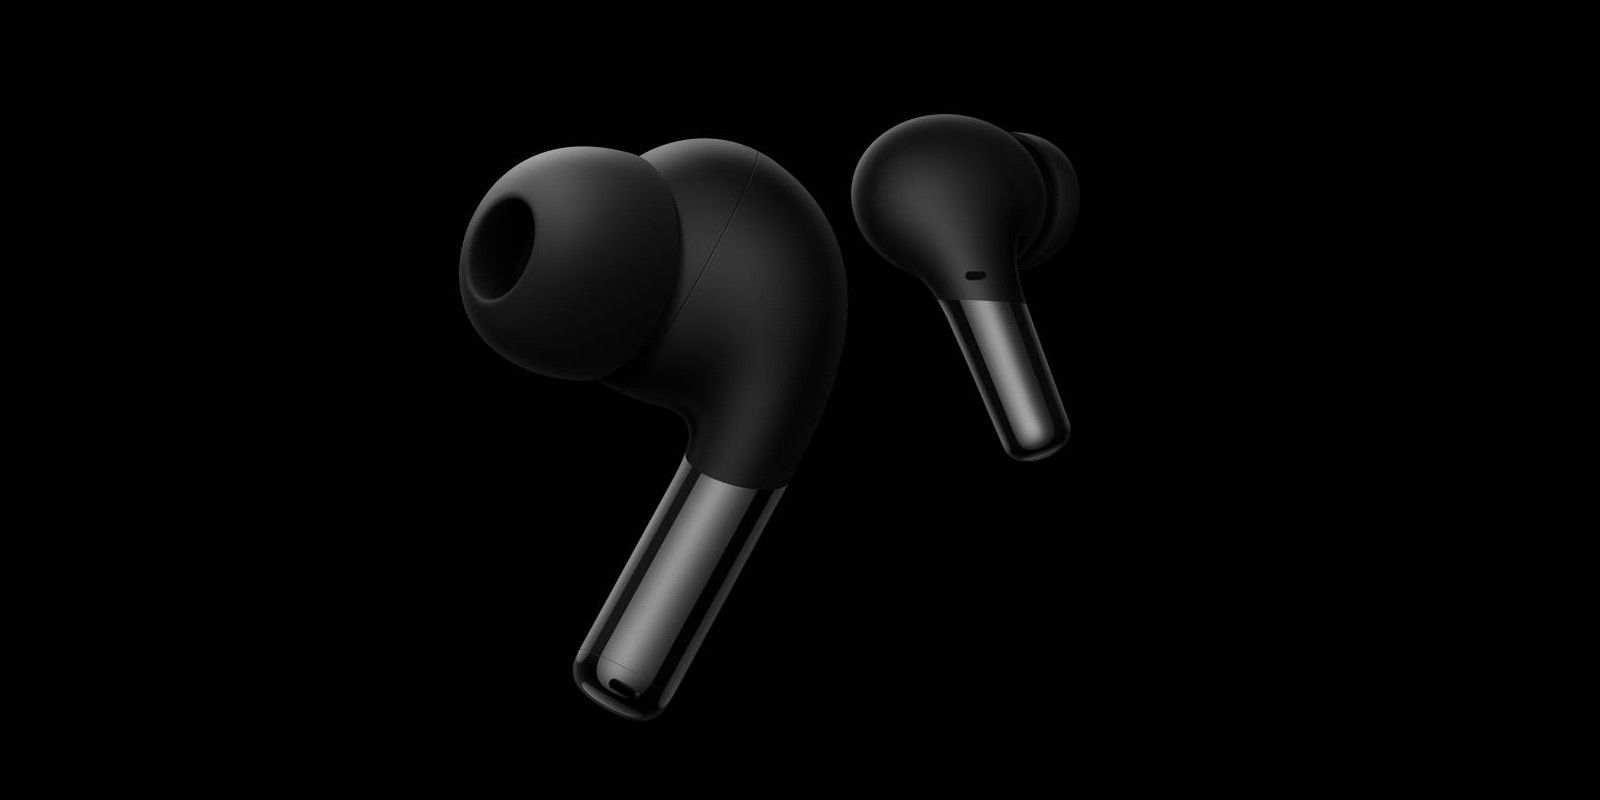 OnePlus Buds Pro black pictured on a black background